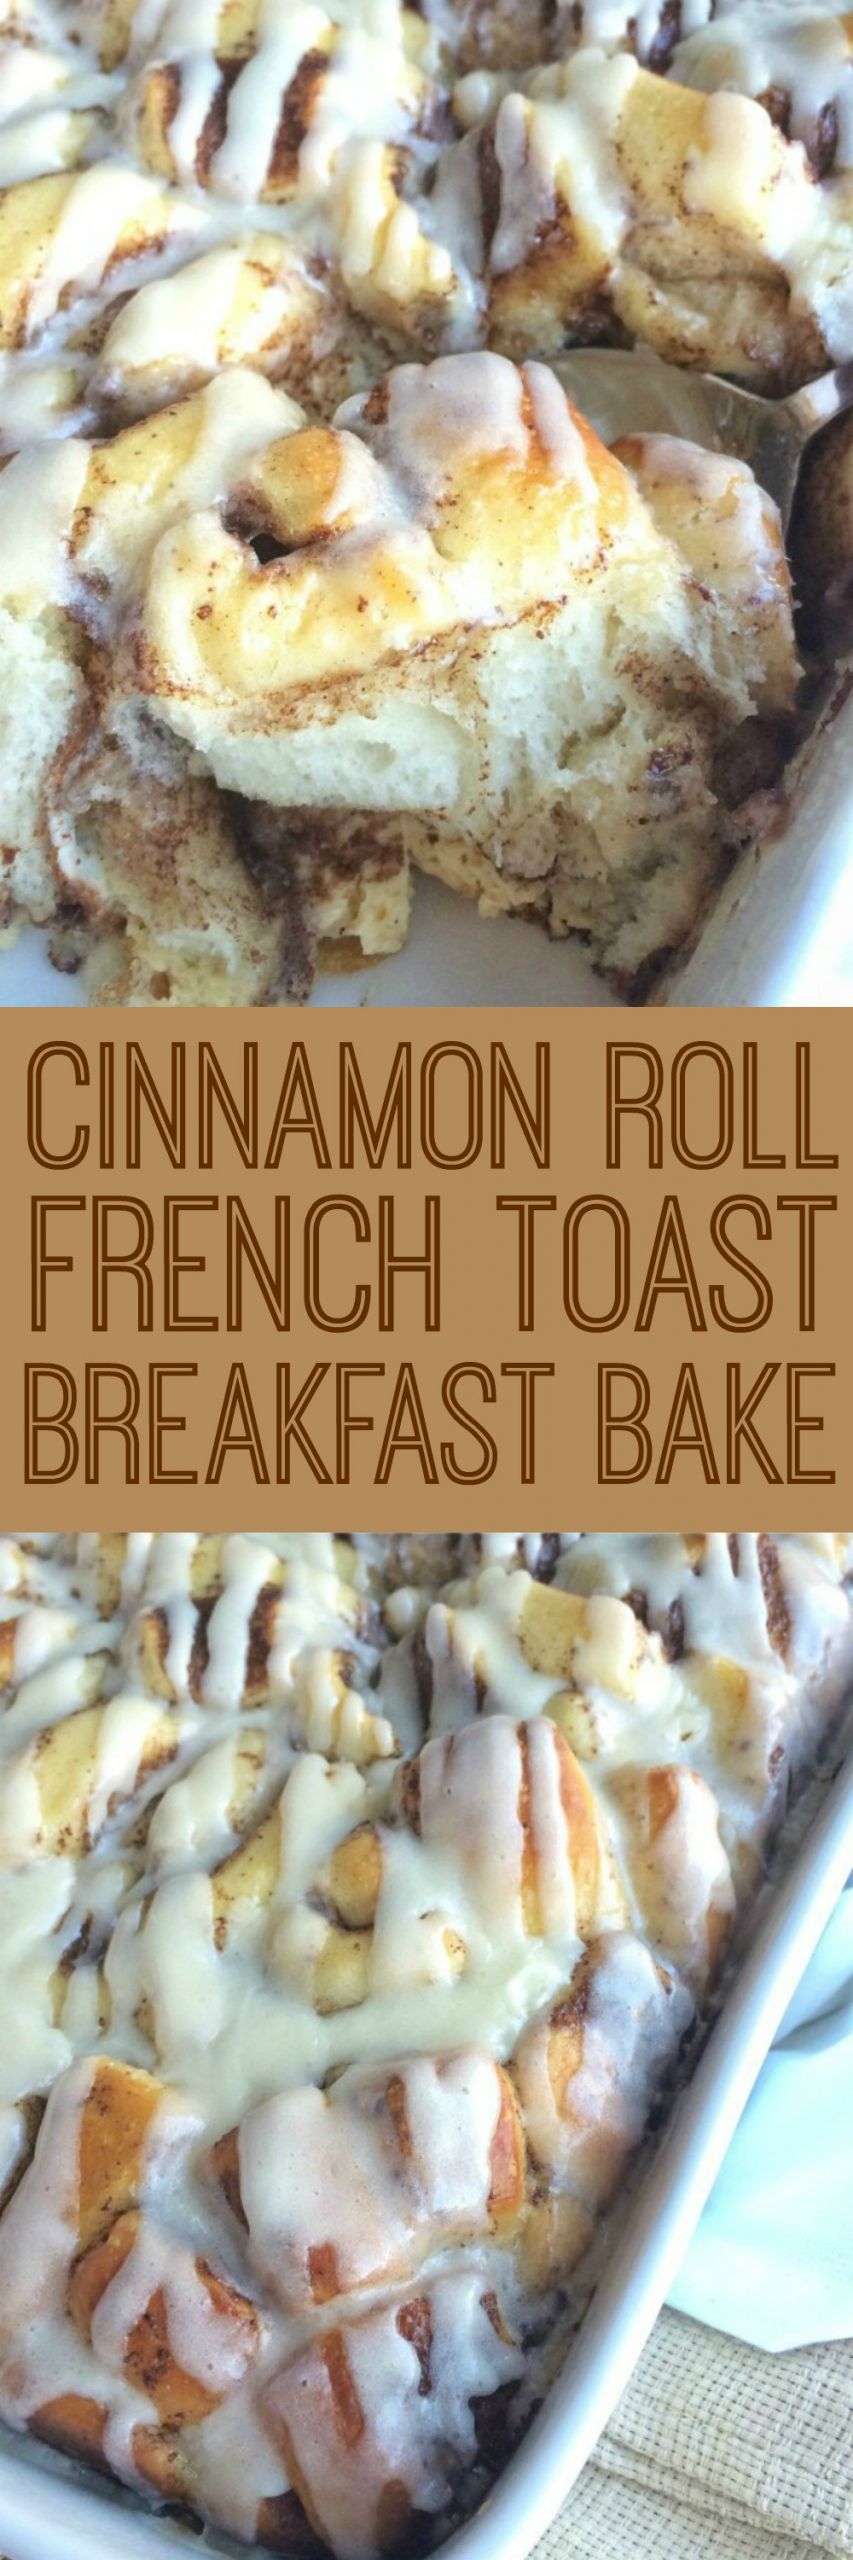 Overnight Cinnamon Roll French Toast Casserole
 Cinnamon Roll French Toast Breakfast Bake To her as Family